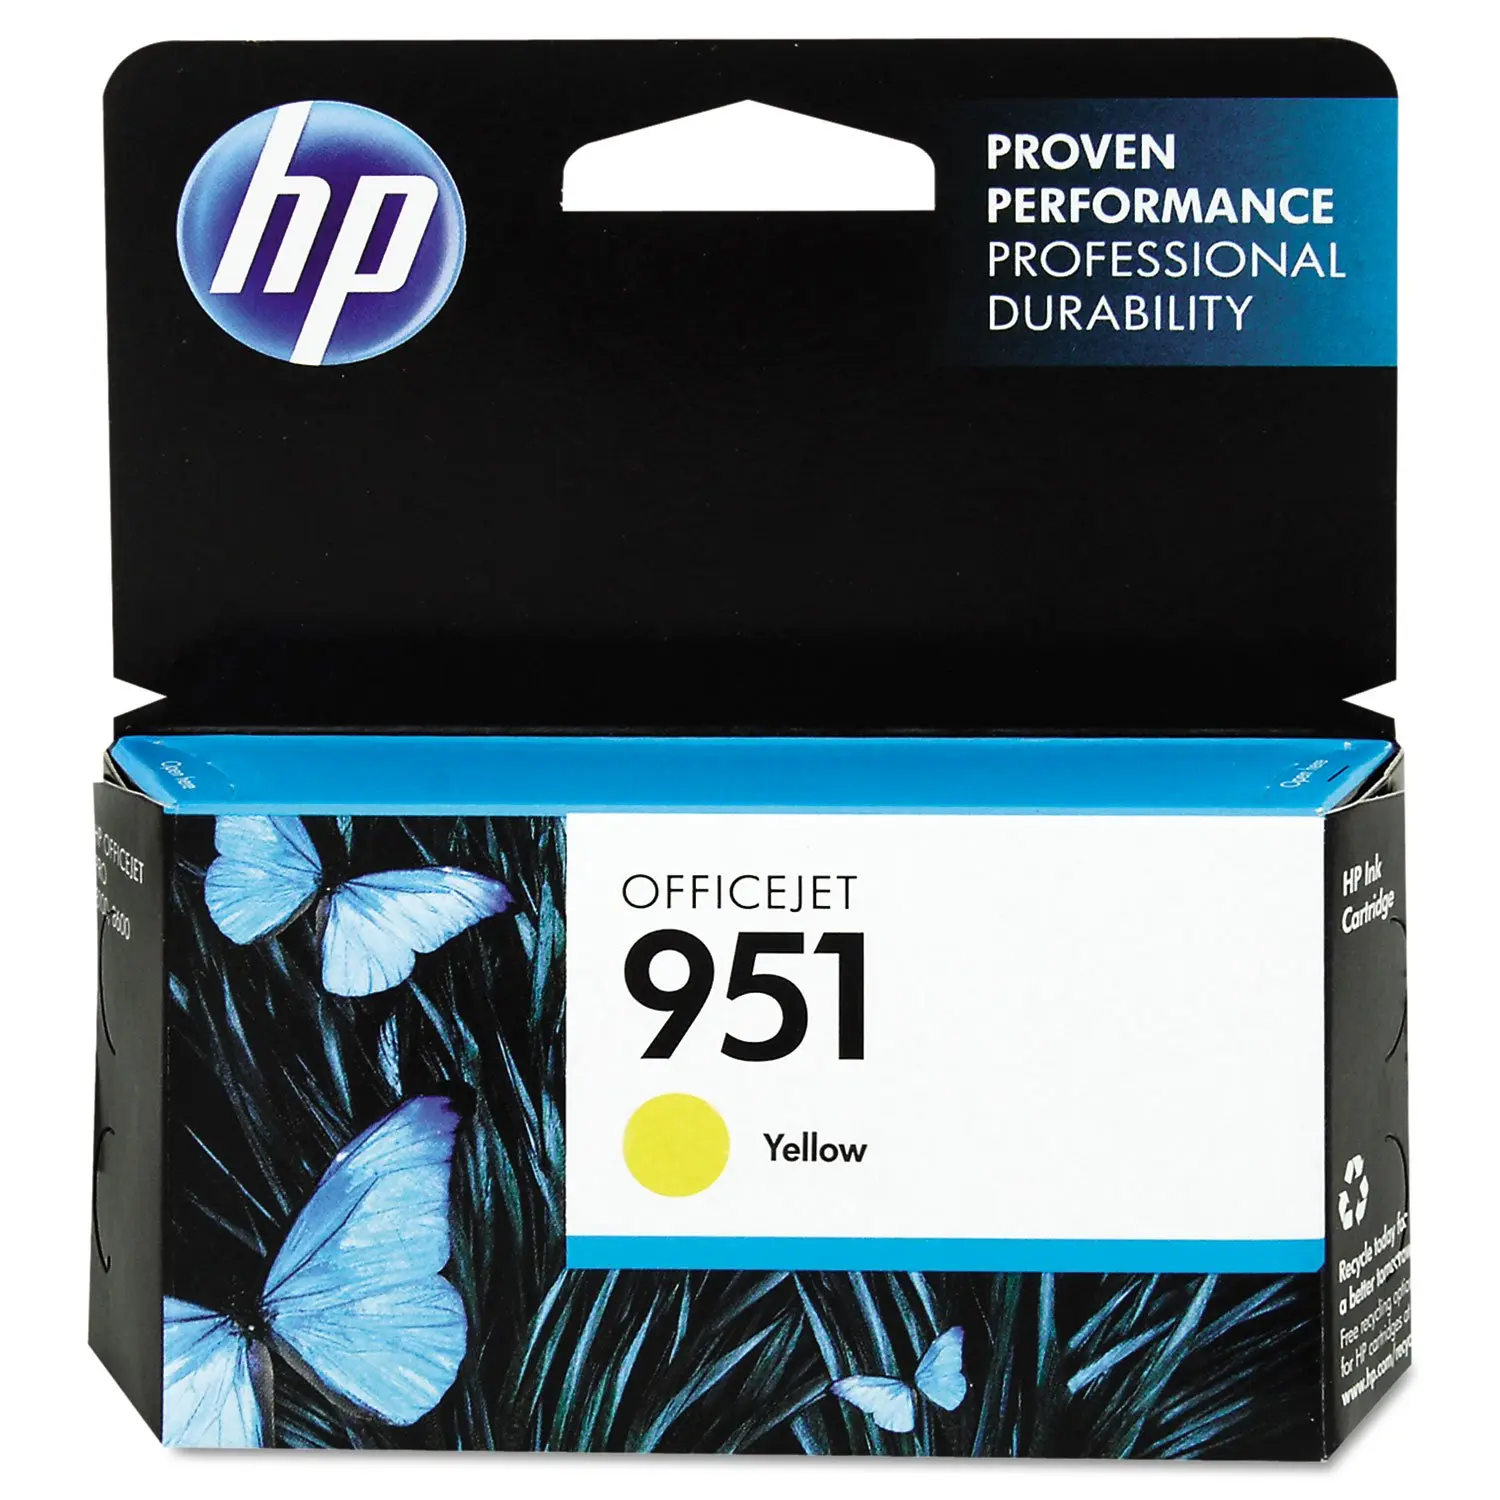 hewlett packard 8600 ink cartridges - What ink does the HP 8600 use